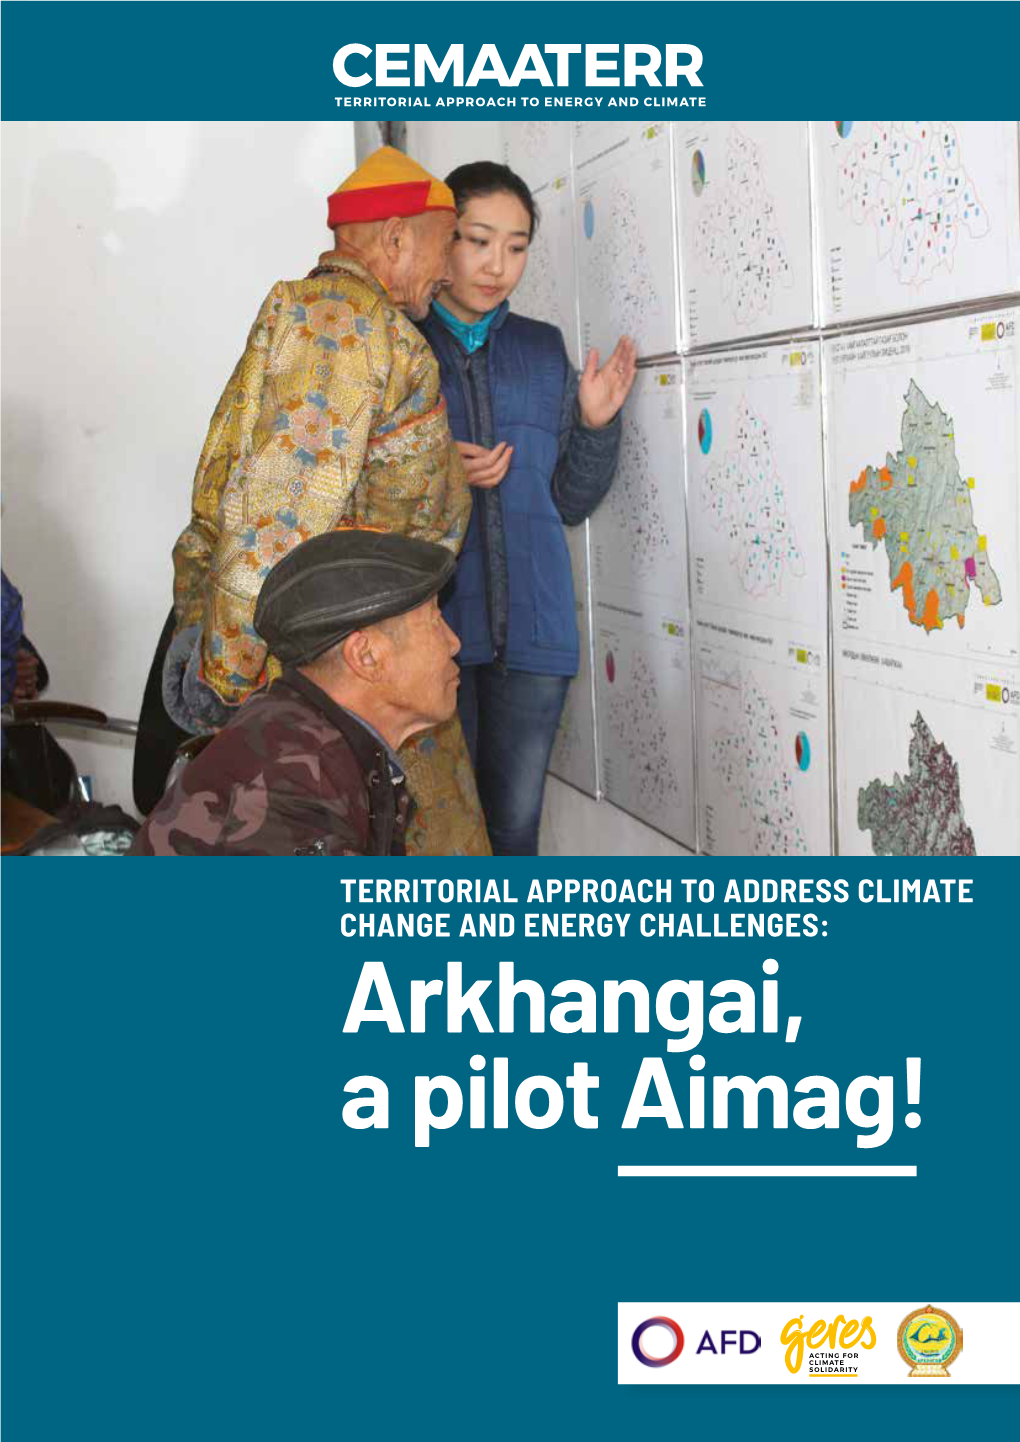 Arkhangai, a Pilot Aimag! Components of Climate Energy Territorial Approach in Arkhangai Province